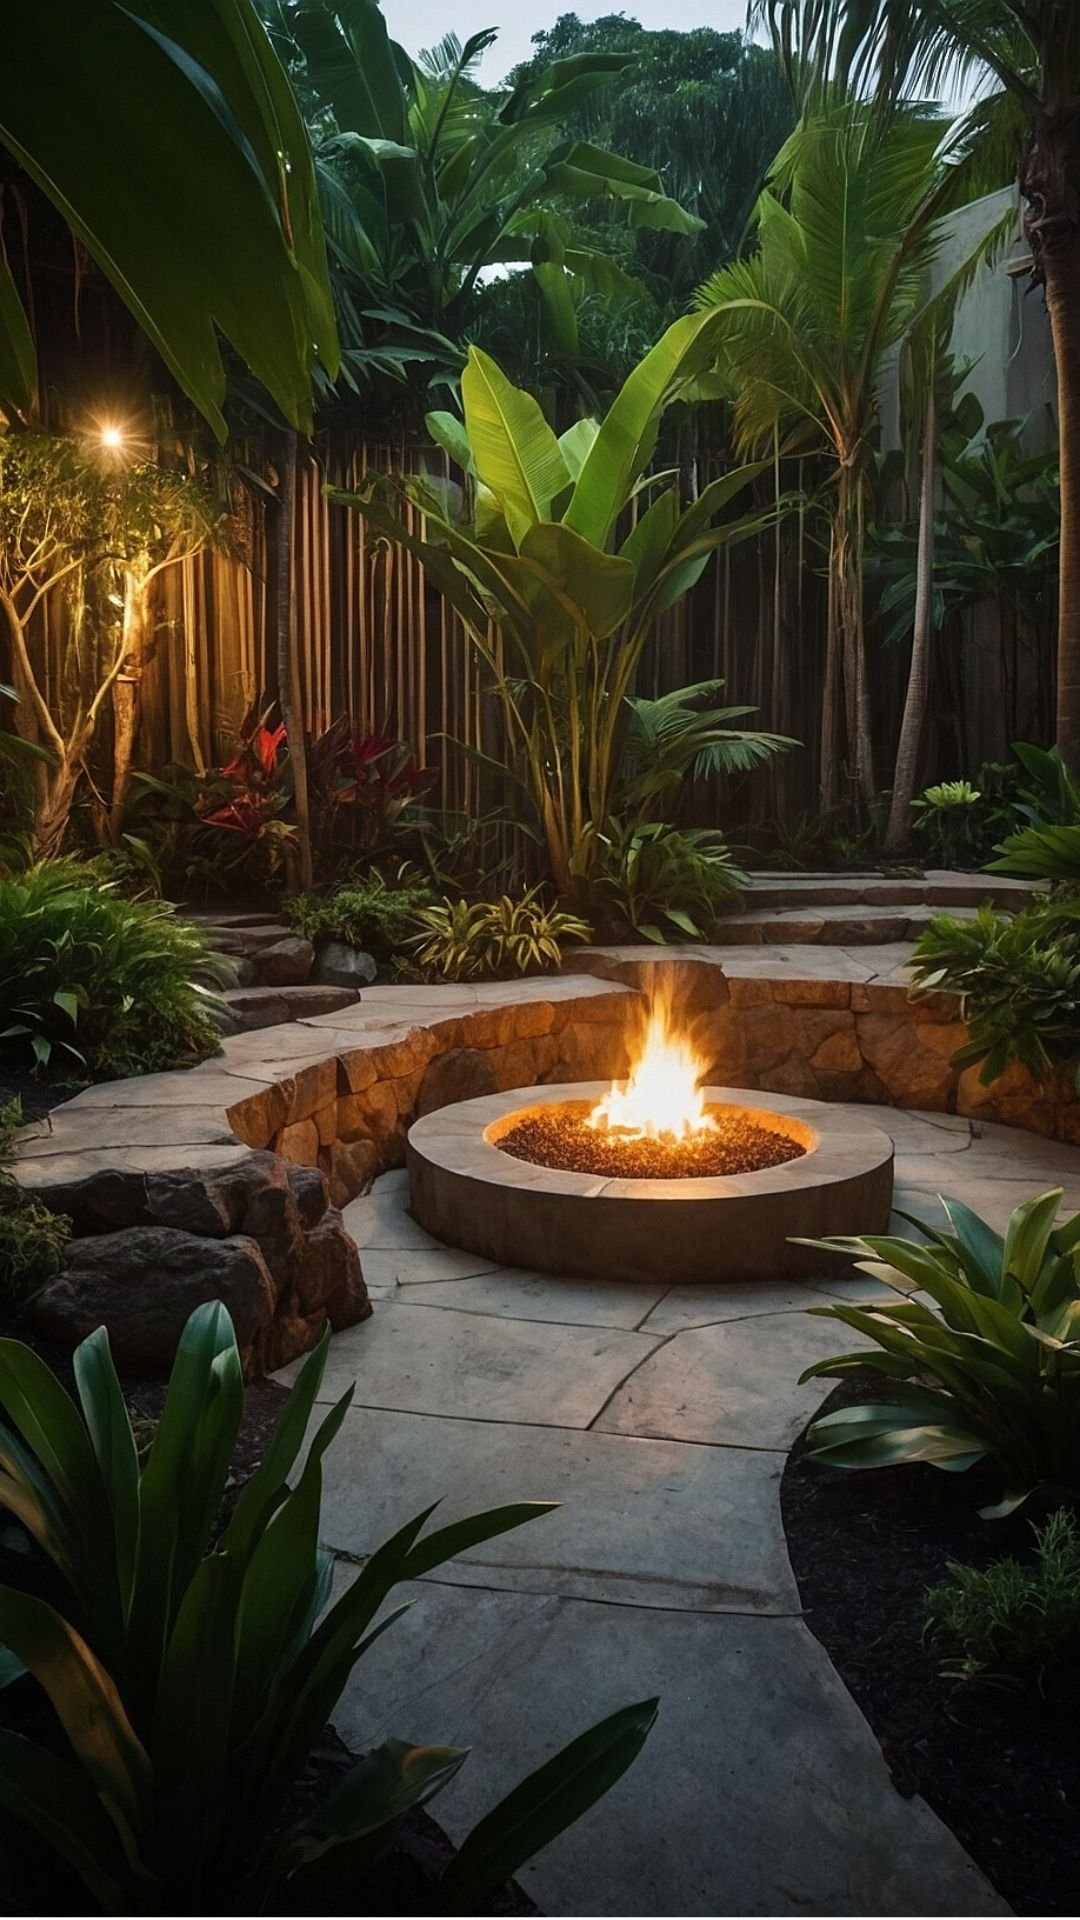 Evening Harmony: Cozy Fire Pit in a Tropical Garden Setting